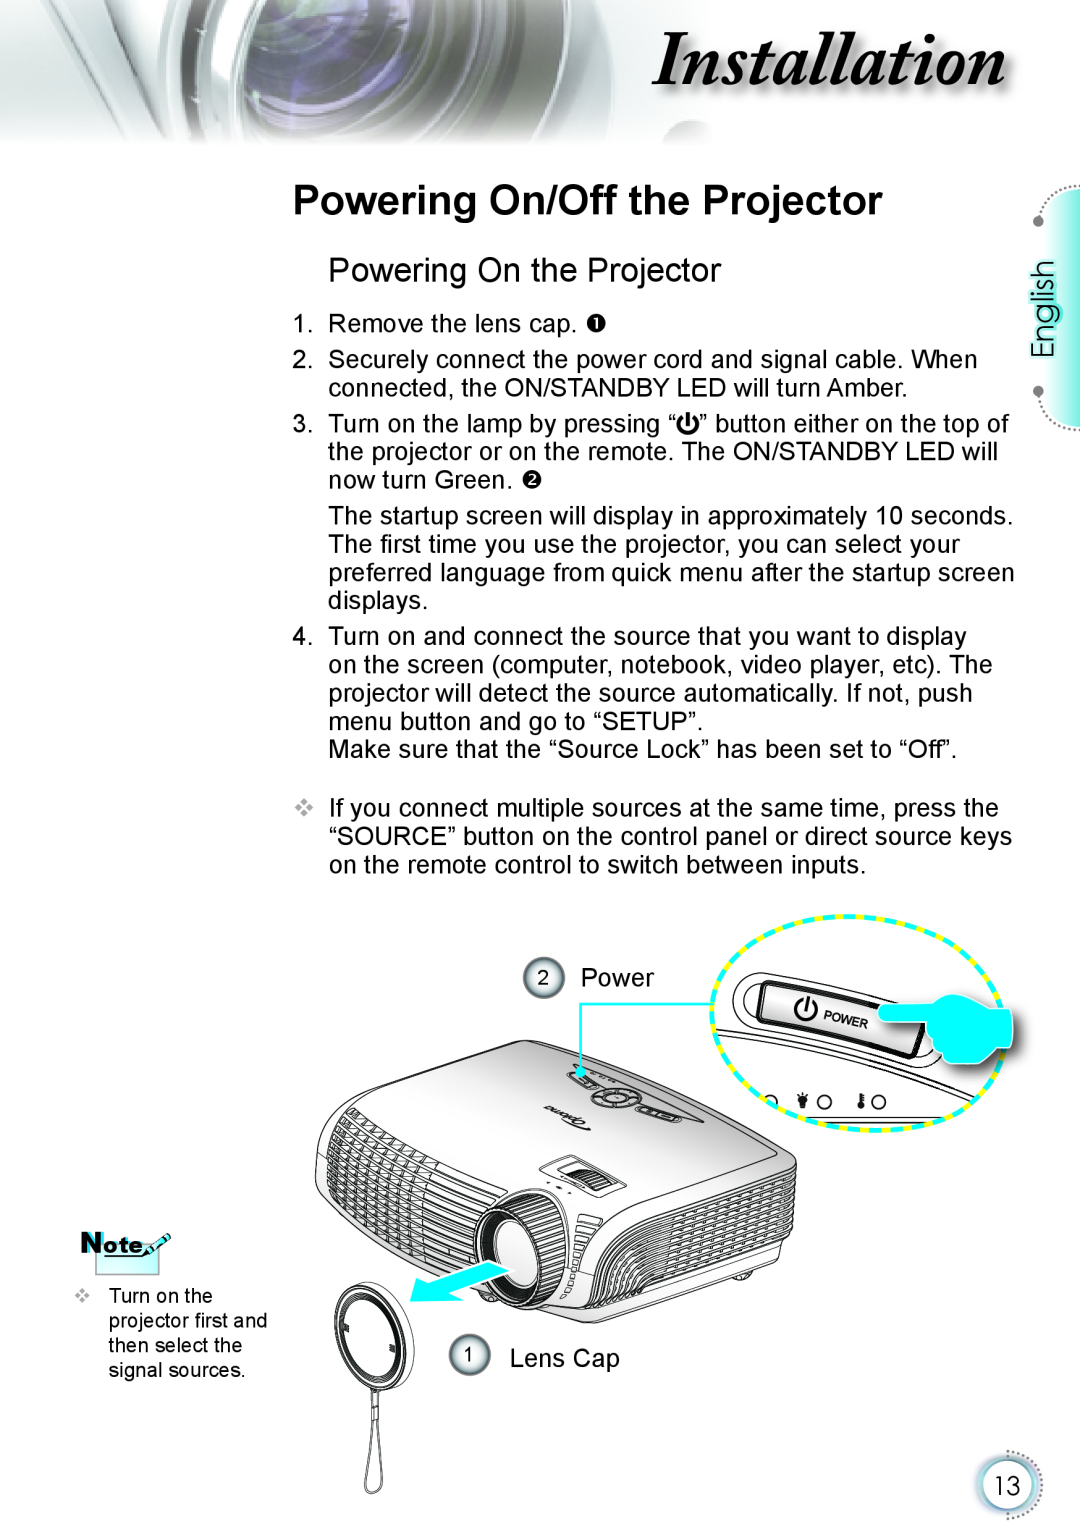 Optoma Technology HD20 manual Powering On/Off the Projector, Powering On the Projector, nstallation 